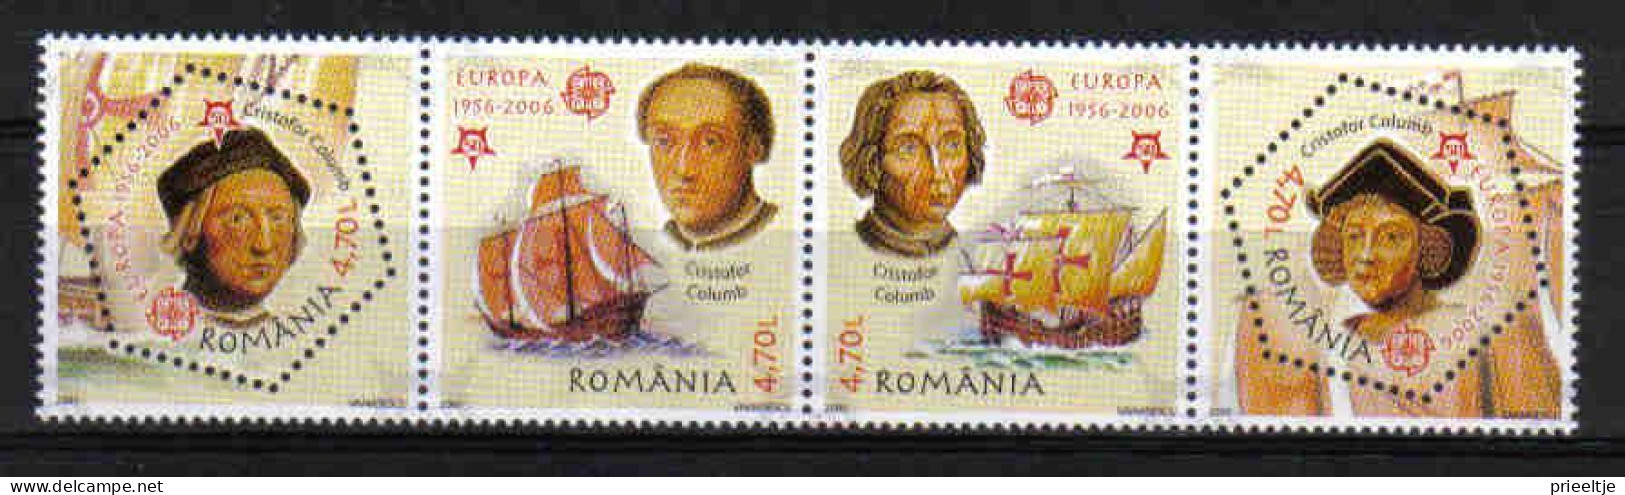 Romania 2006 50th Anniv. Of Europa Stamps Strip Y.T. 5011/5014 ** - Unused Stamps